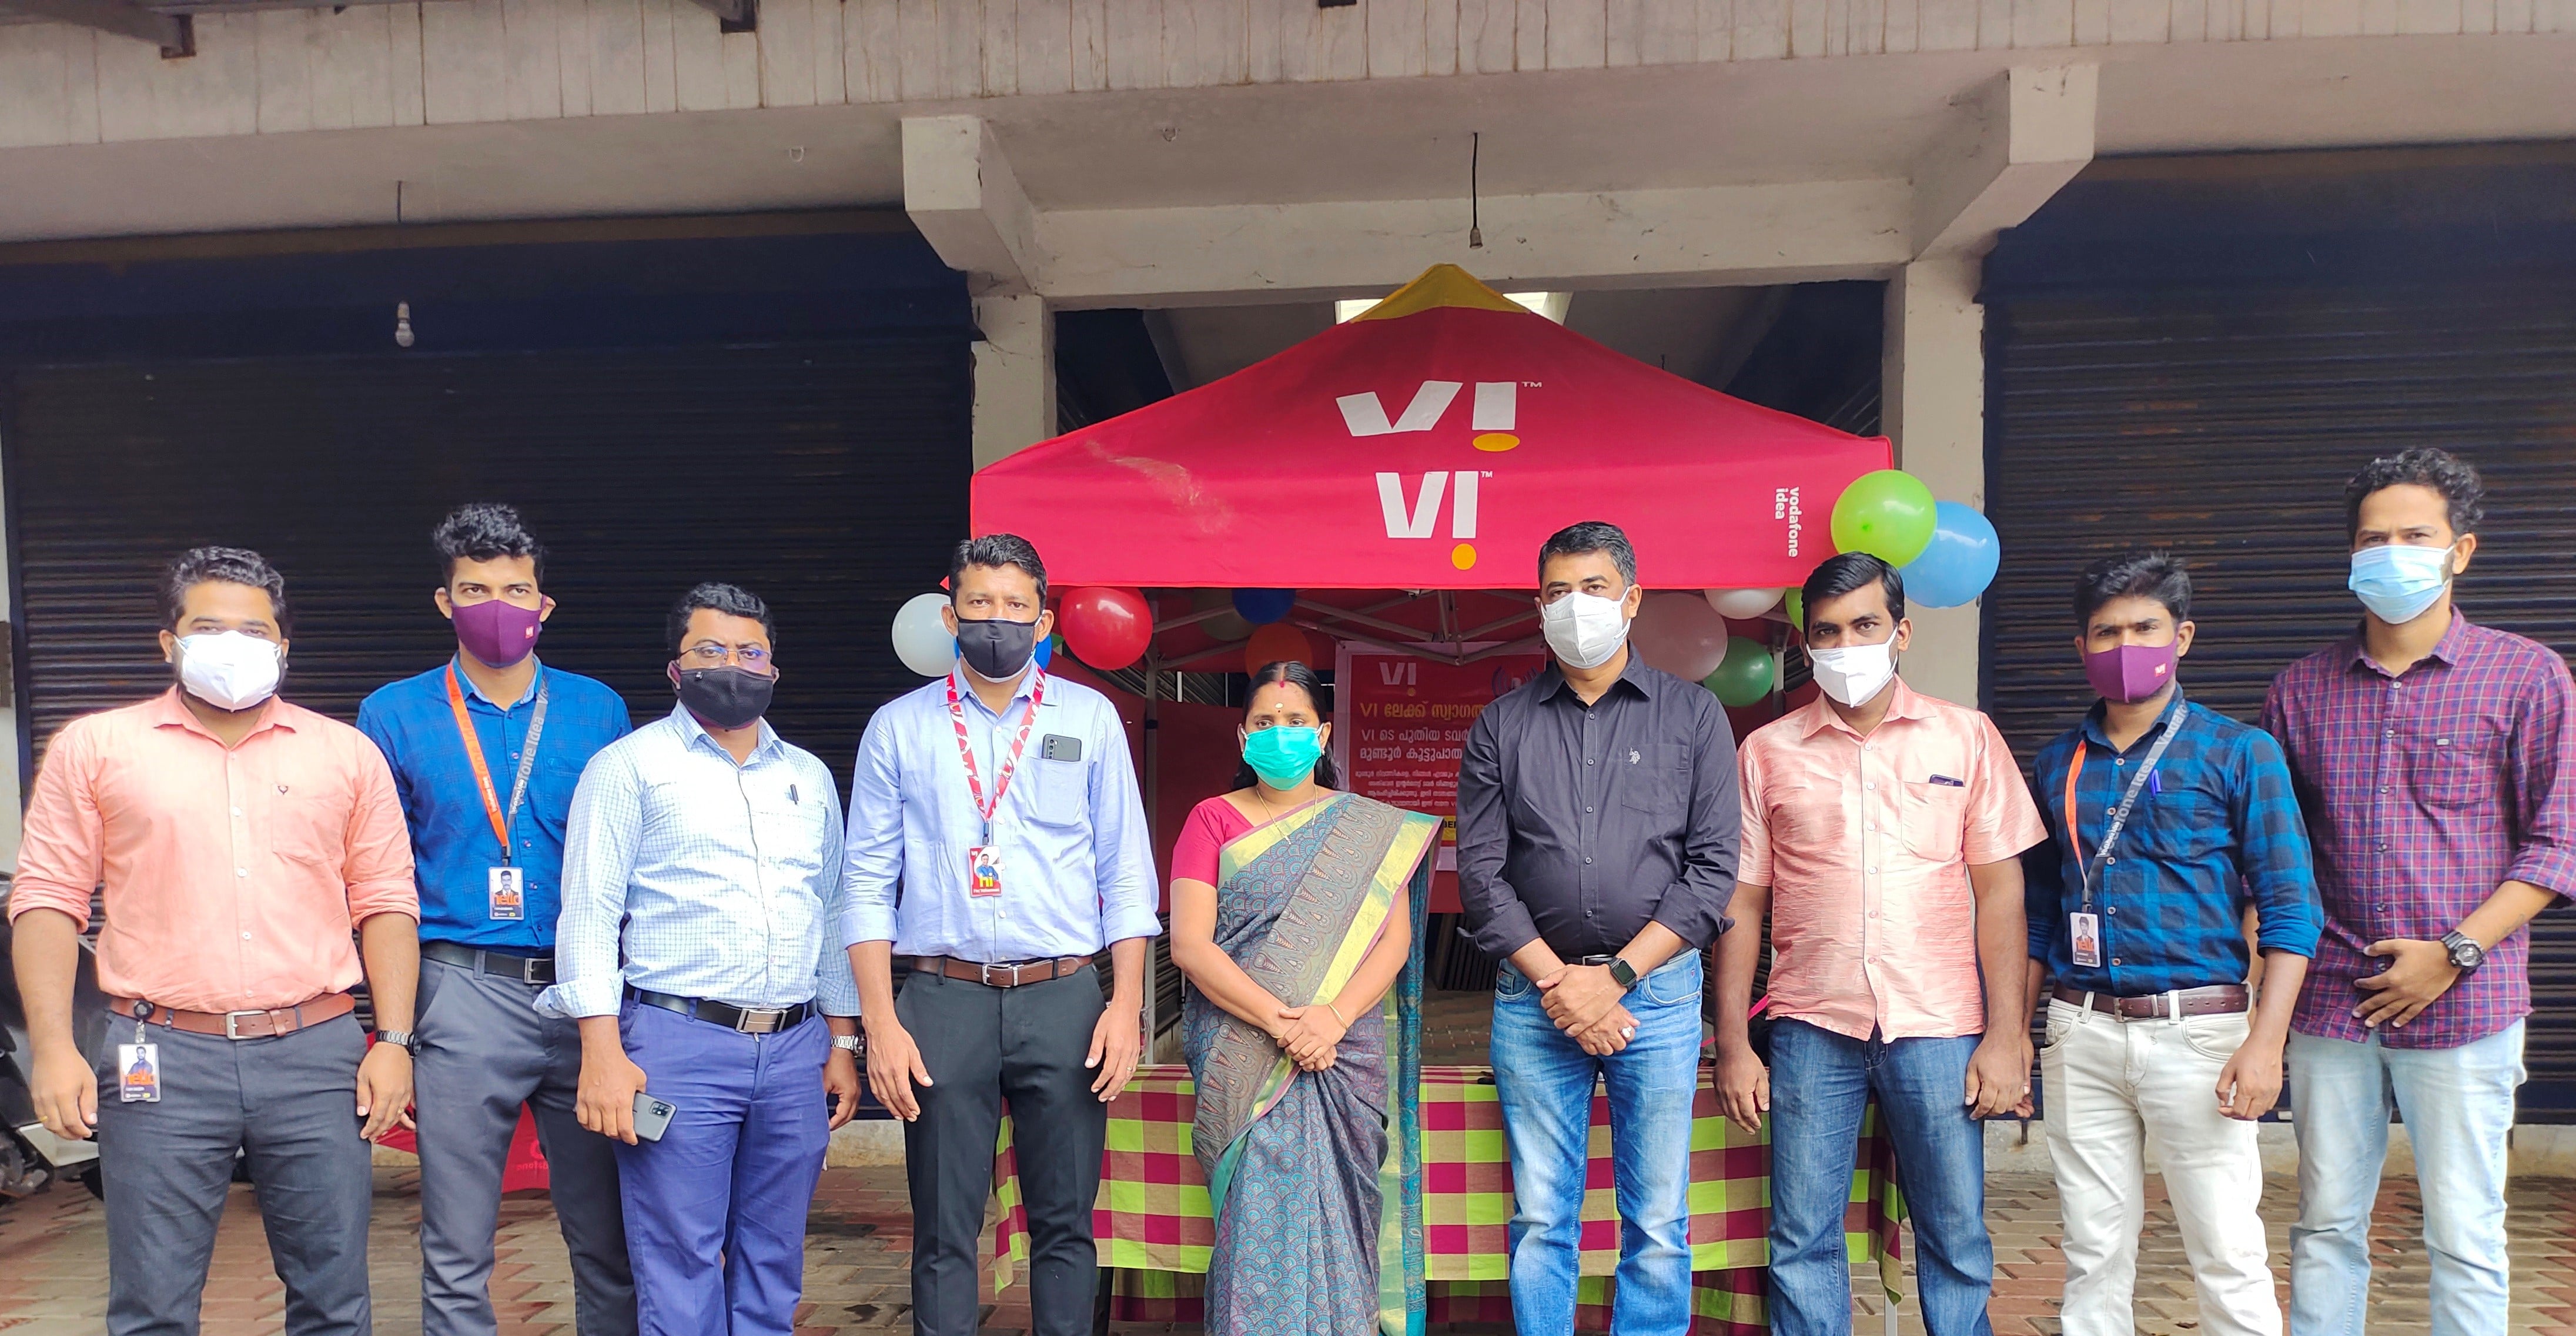 Vi brings network connectivity for the residents of Kootupatha